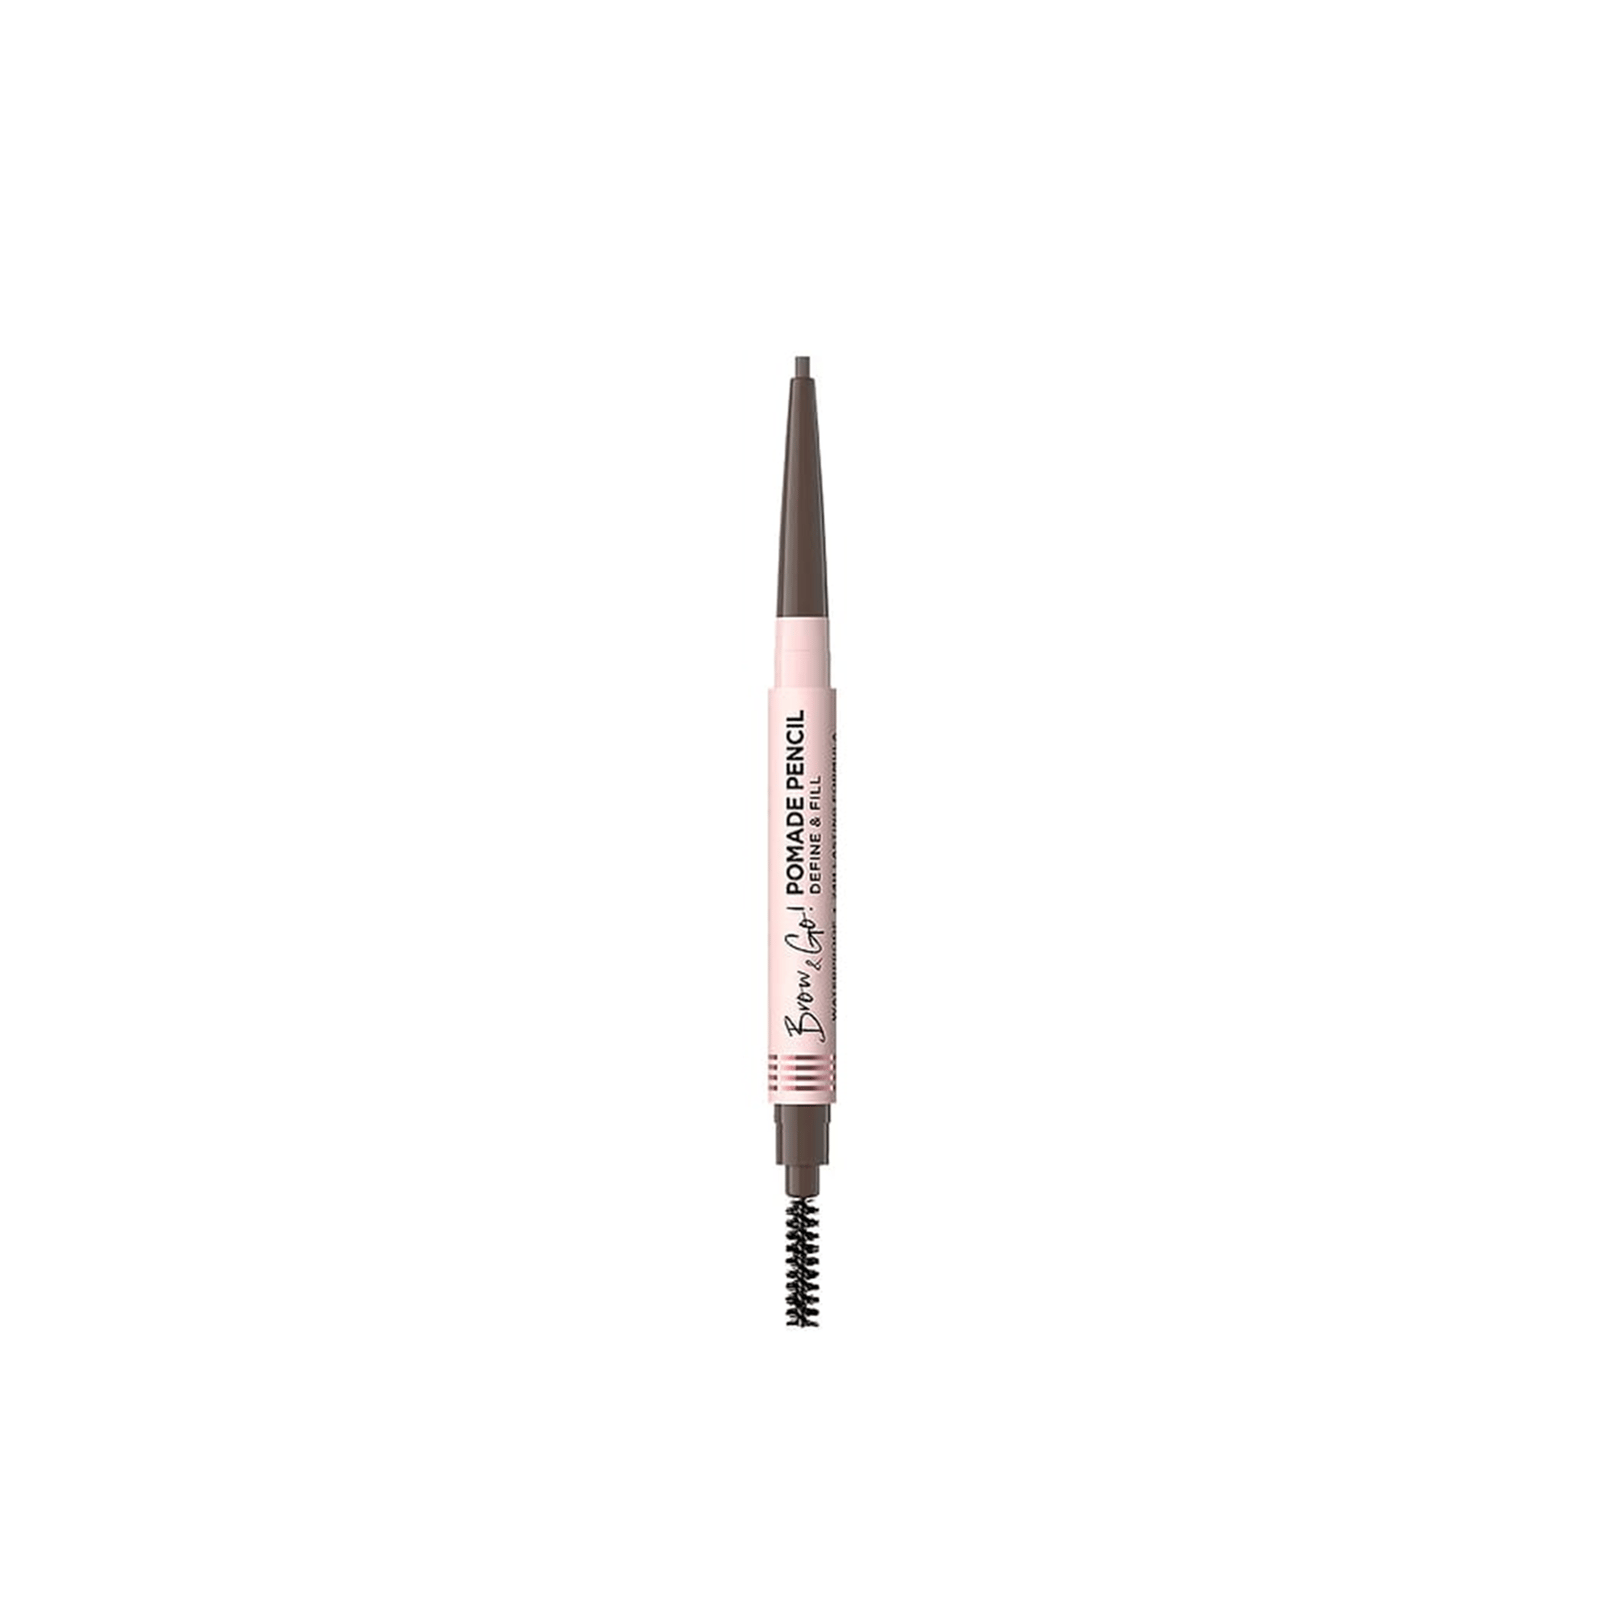 Eveline Cosmetics Brow & Go! 24h Waterproof Pomade Pencil Taupe